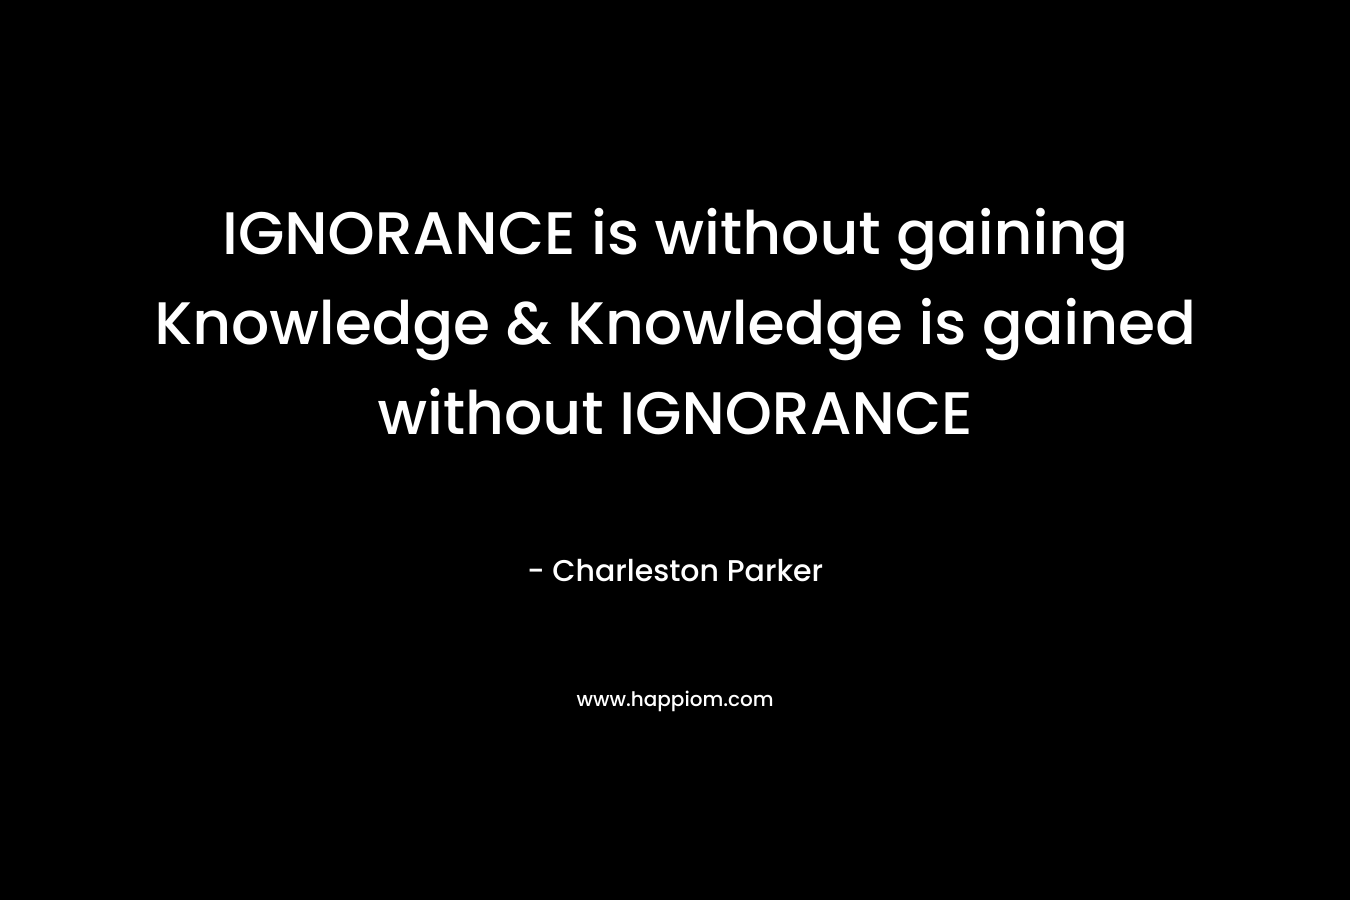 IGNORANCE is without gaining Knowledge & Knowledge is gained without IGNORANCE